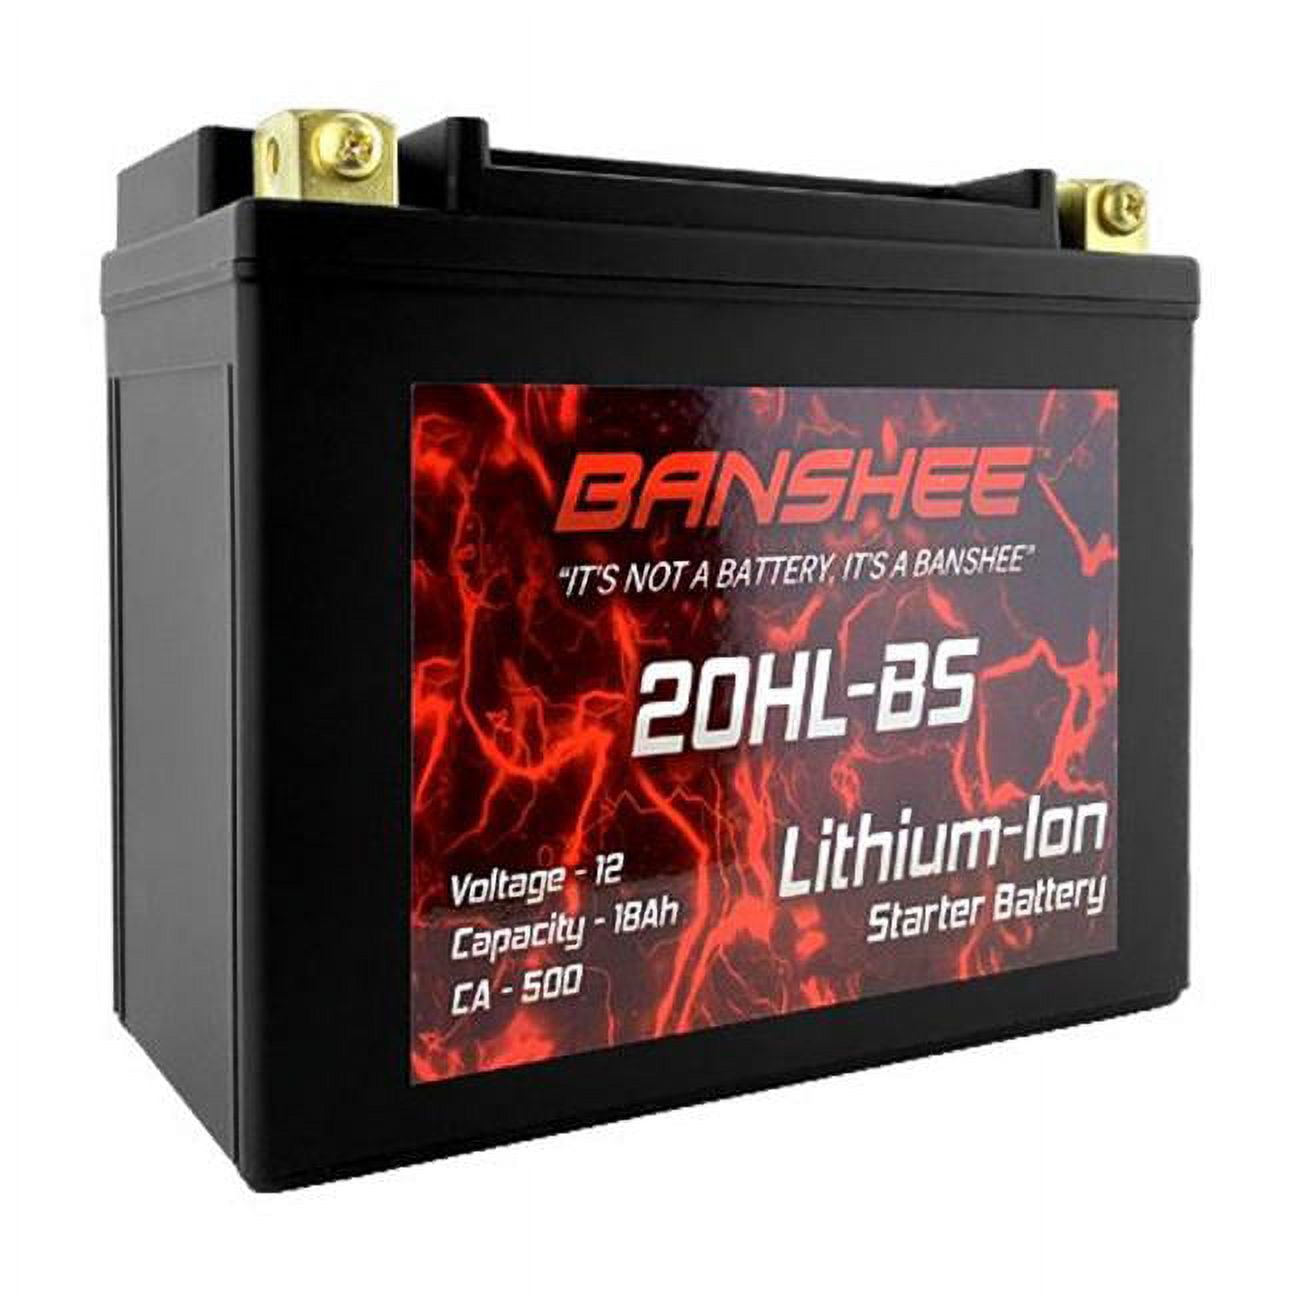 Picture of Banshee DLFP20HL-BS-08 12.8V Lithium LiFePO4 20L-BS Battery for Replacement 78-0827 YTX20HL-BS